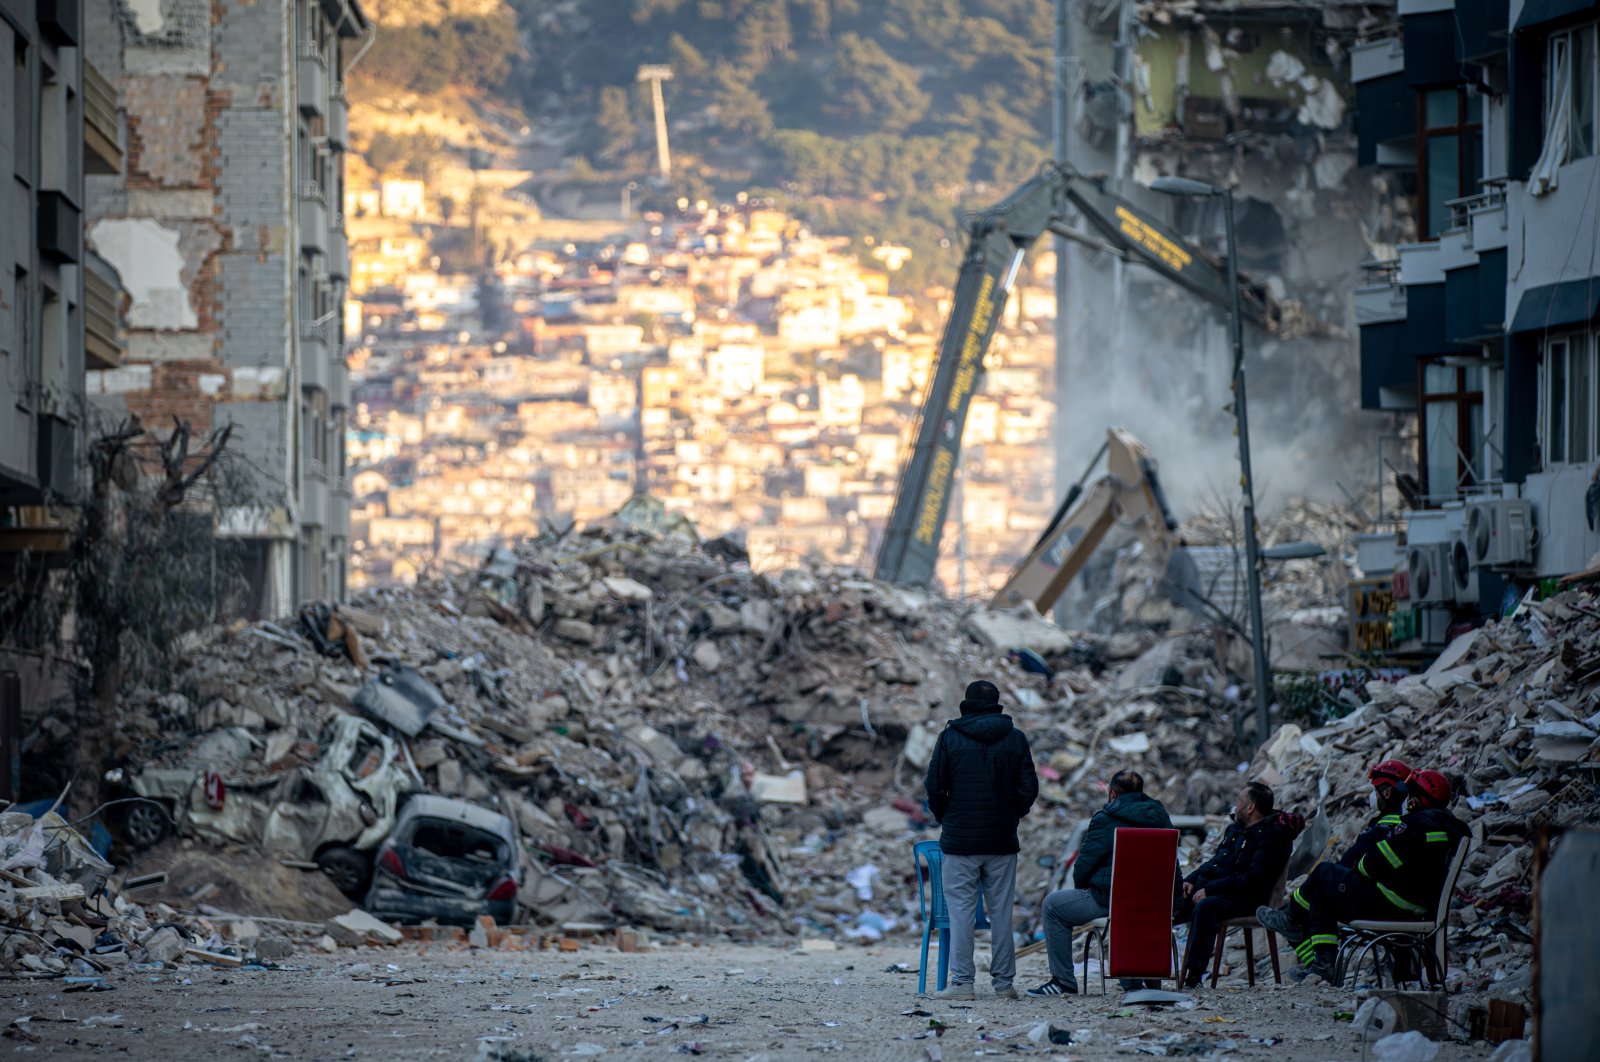 People sit in front of collapsed buildings after the deadly earthquake, in Hatay, southern Türkiye, Feb. 19, 2023. (EPA Photo)